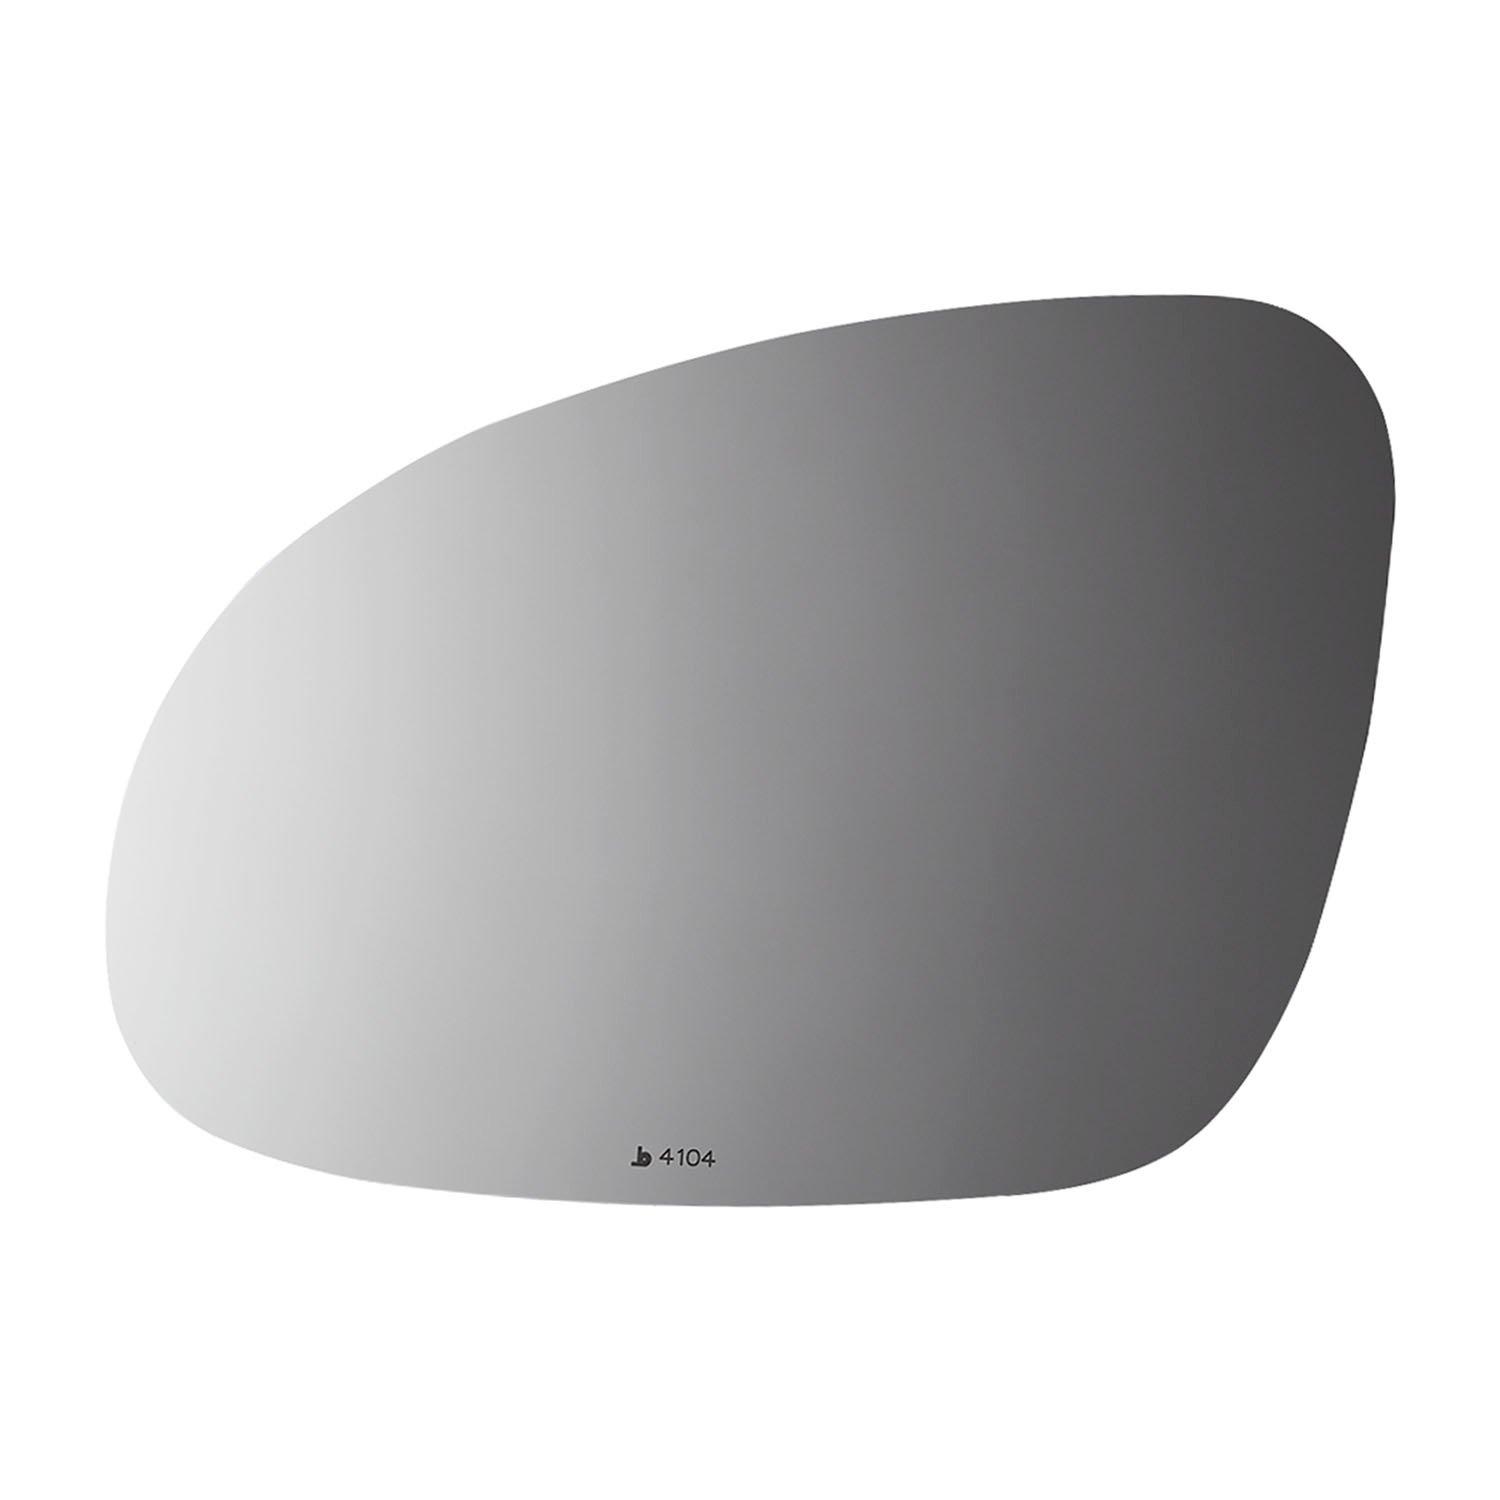 4104 SIDE VIEW MIRROR